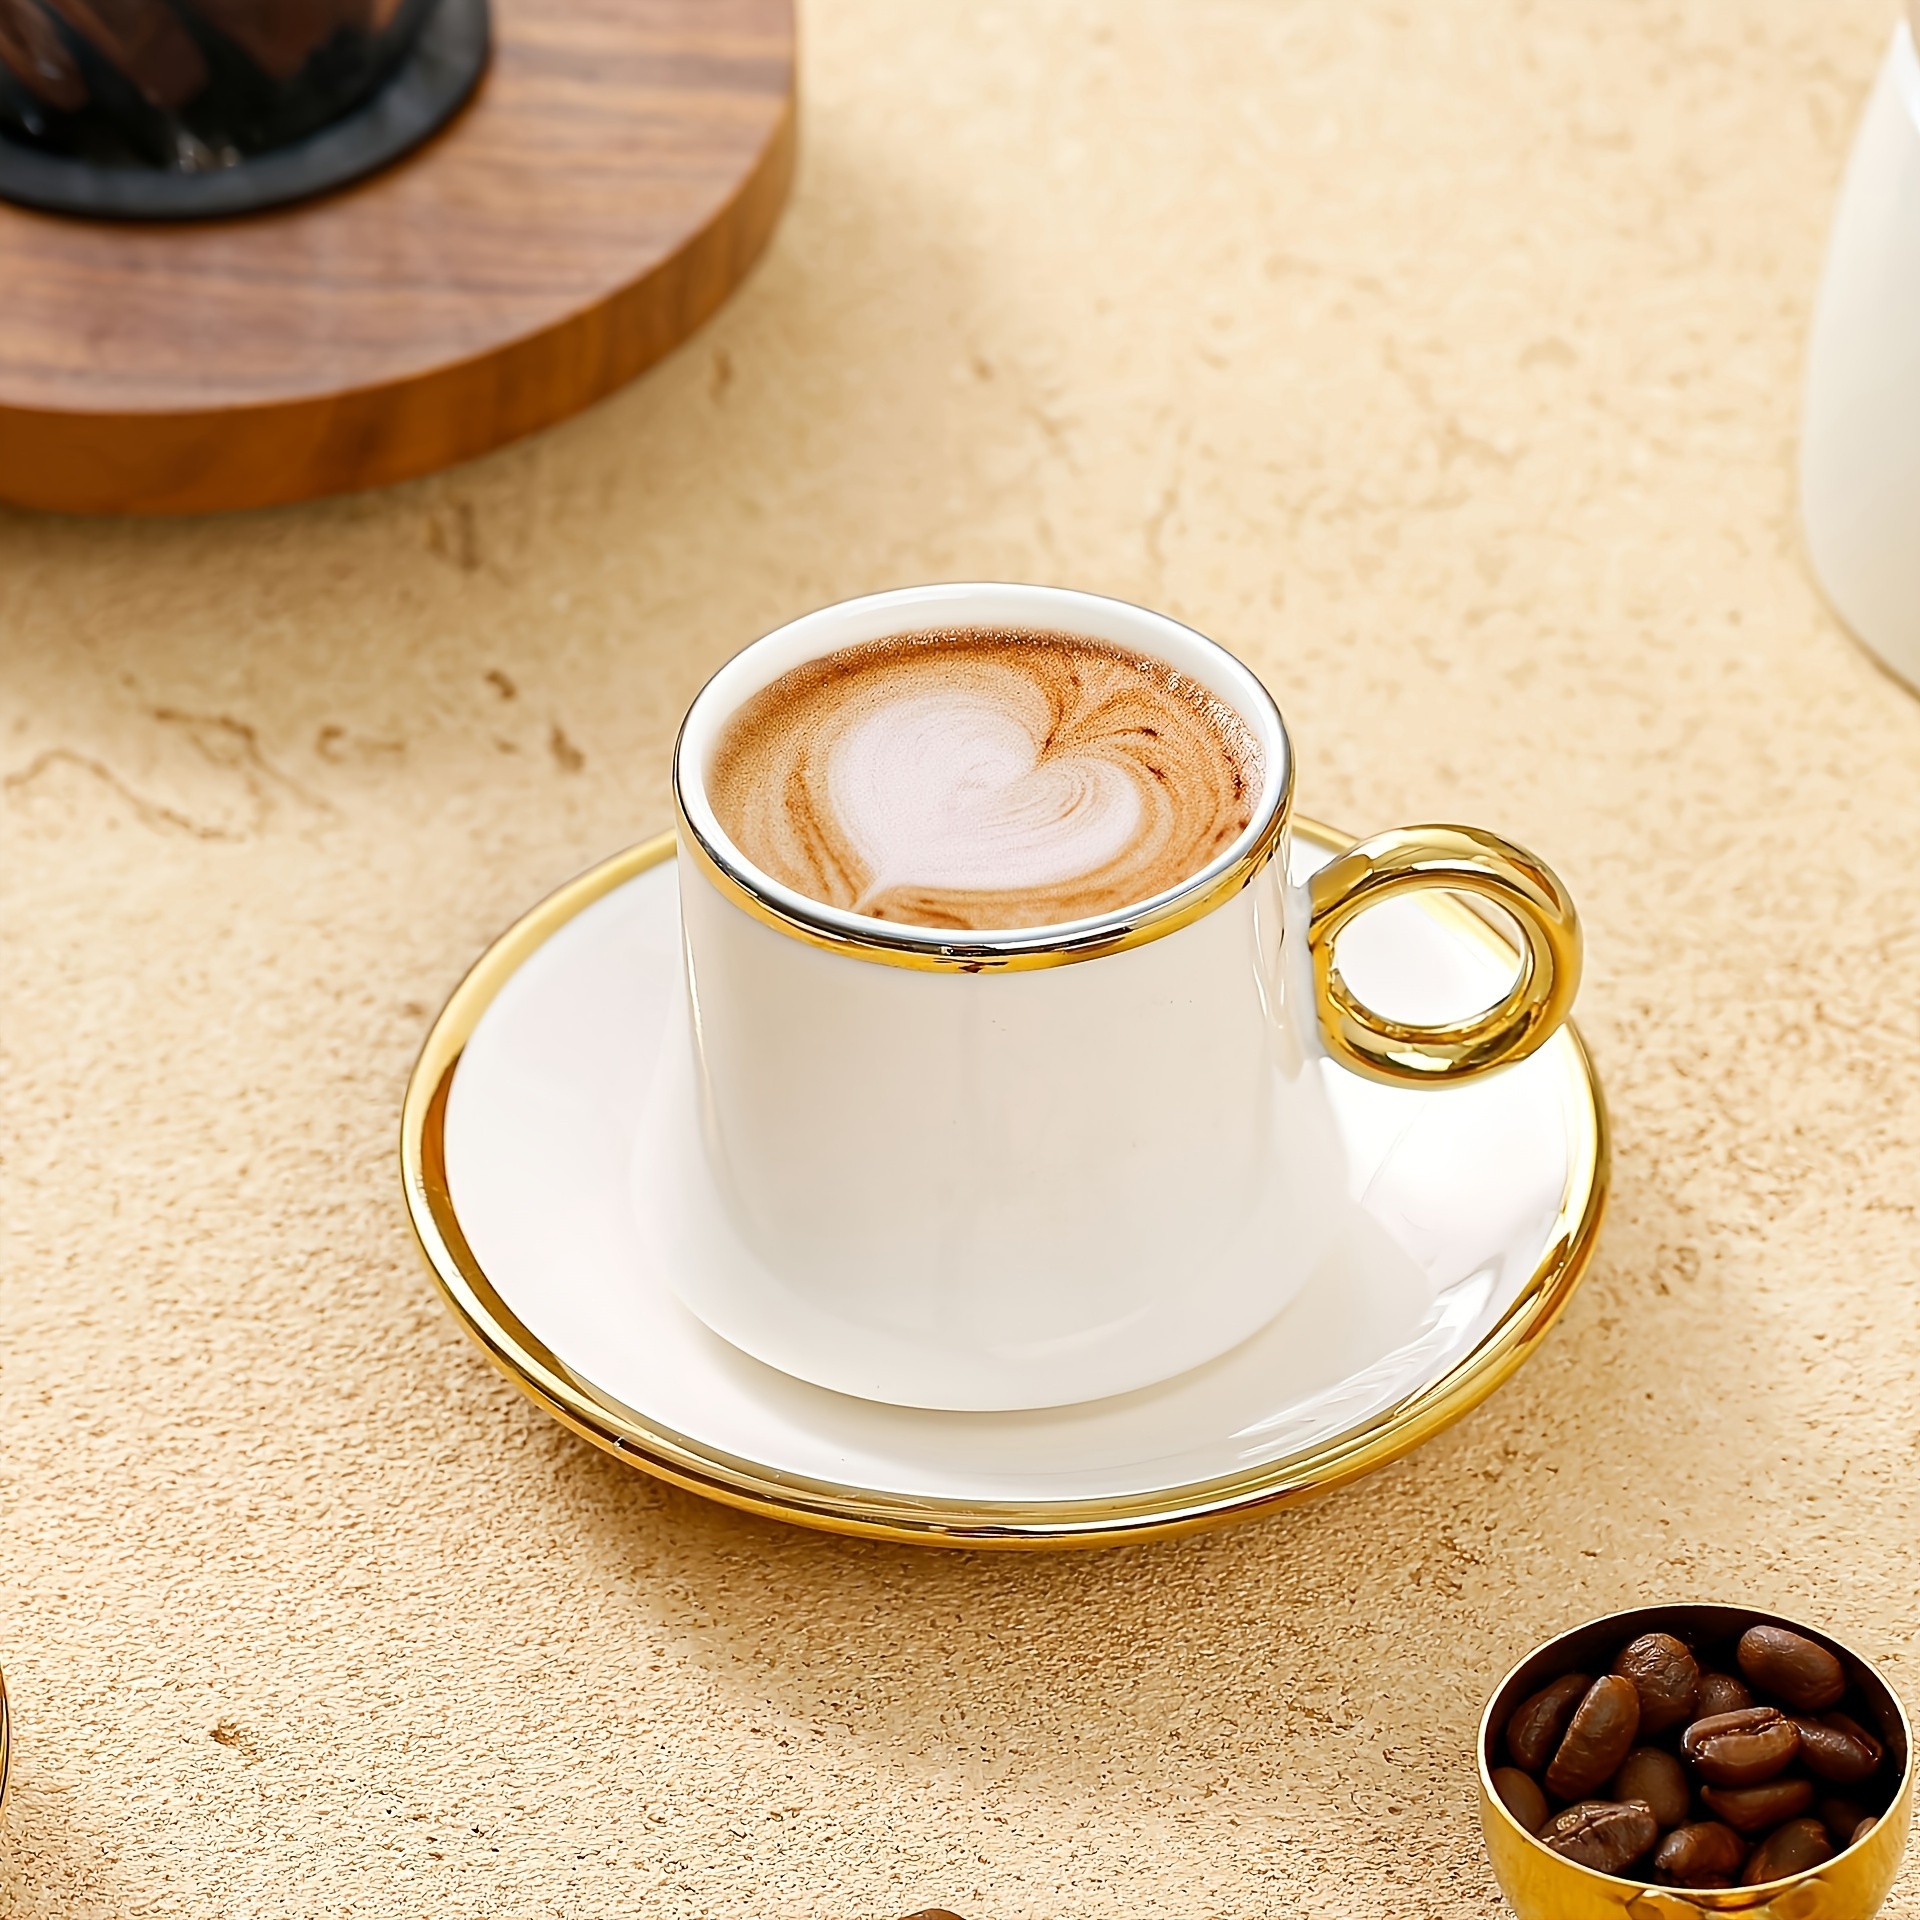 

chic" 1 Set Of 6 Cups And 6 Saucers Gold-plated Ceramic Coffee Cups, Paired With Romantic And Mellow Coffee, Can Not Only Enhance Our Taste In Life, But Also Cultivate And Intoxicate Our Hearts!